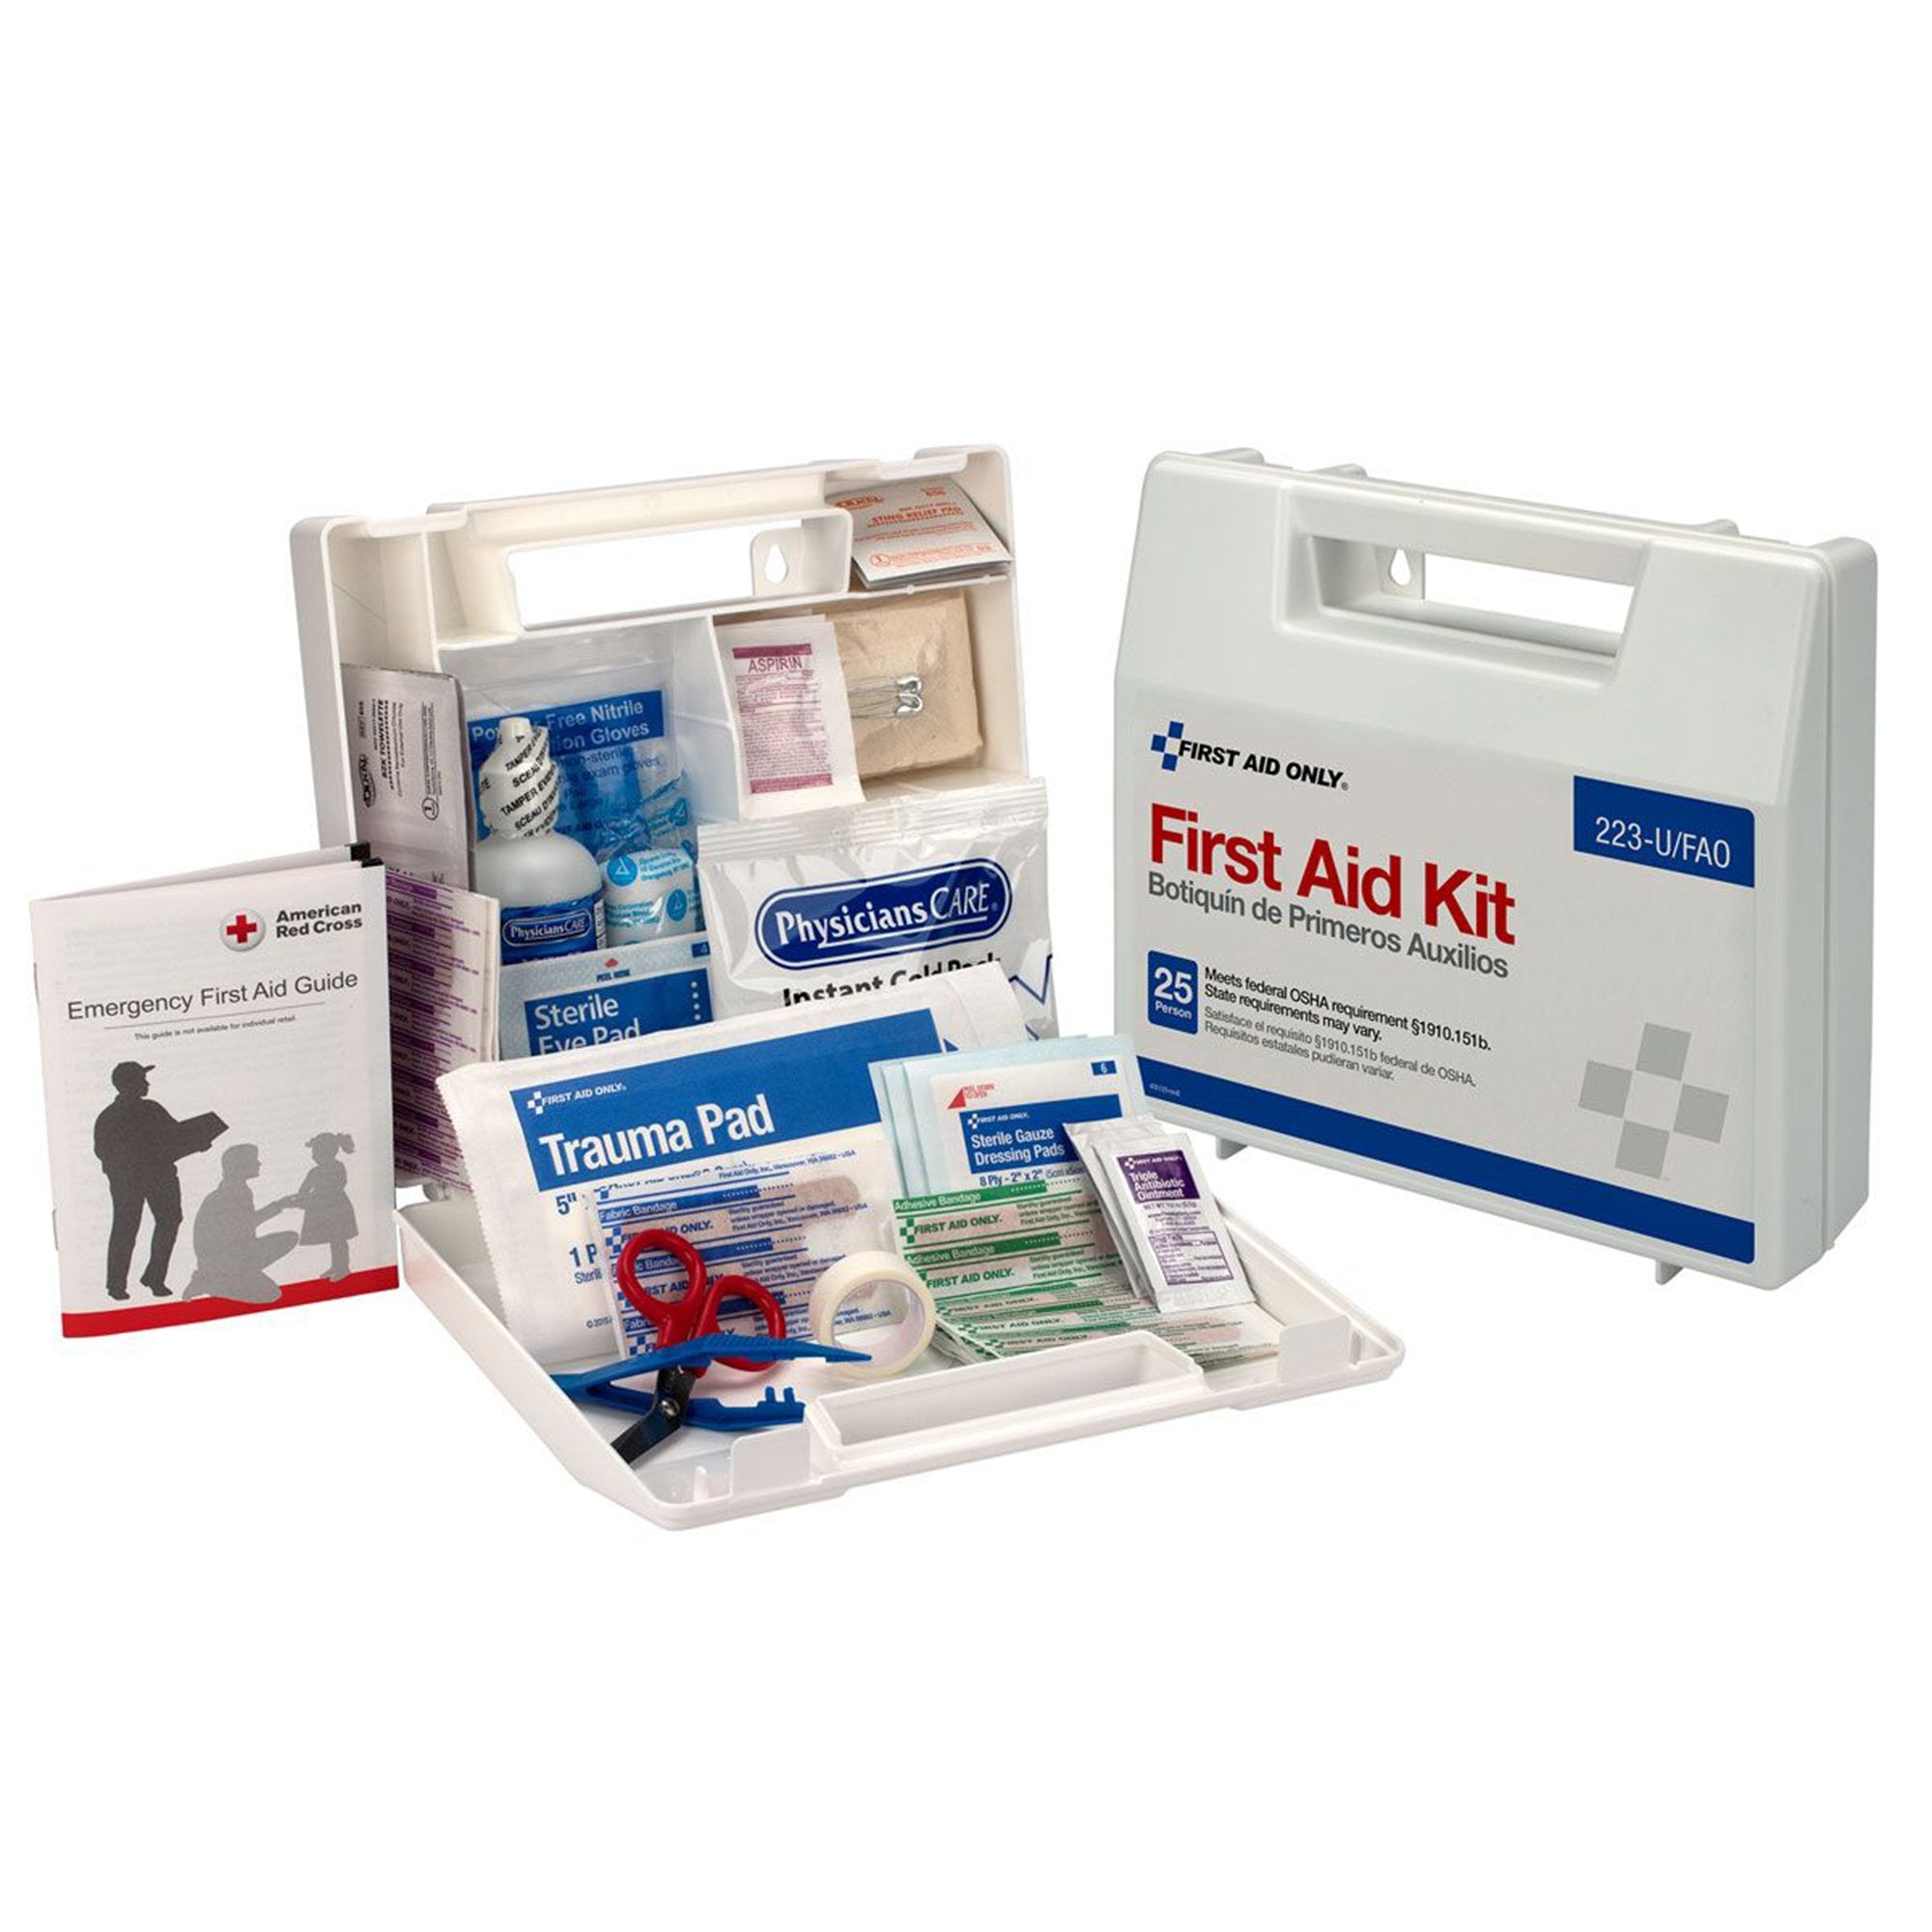 First Aid Kit First Aid Only® 25 Person Plastic Case